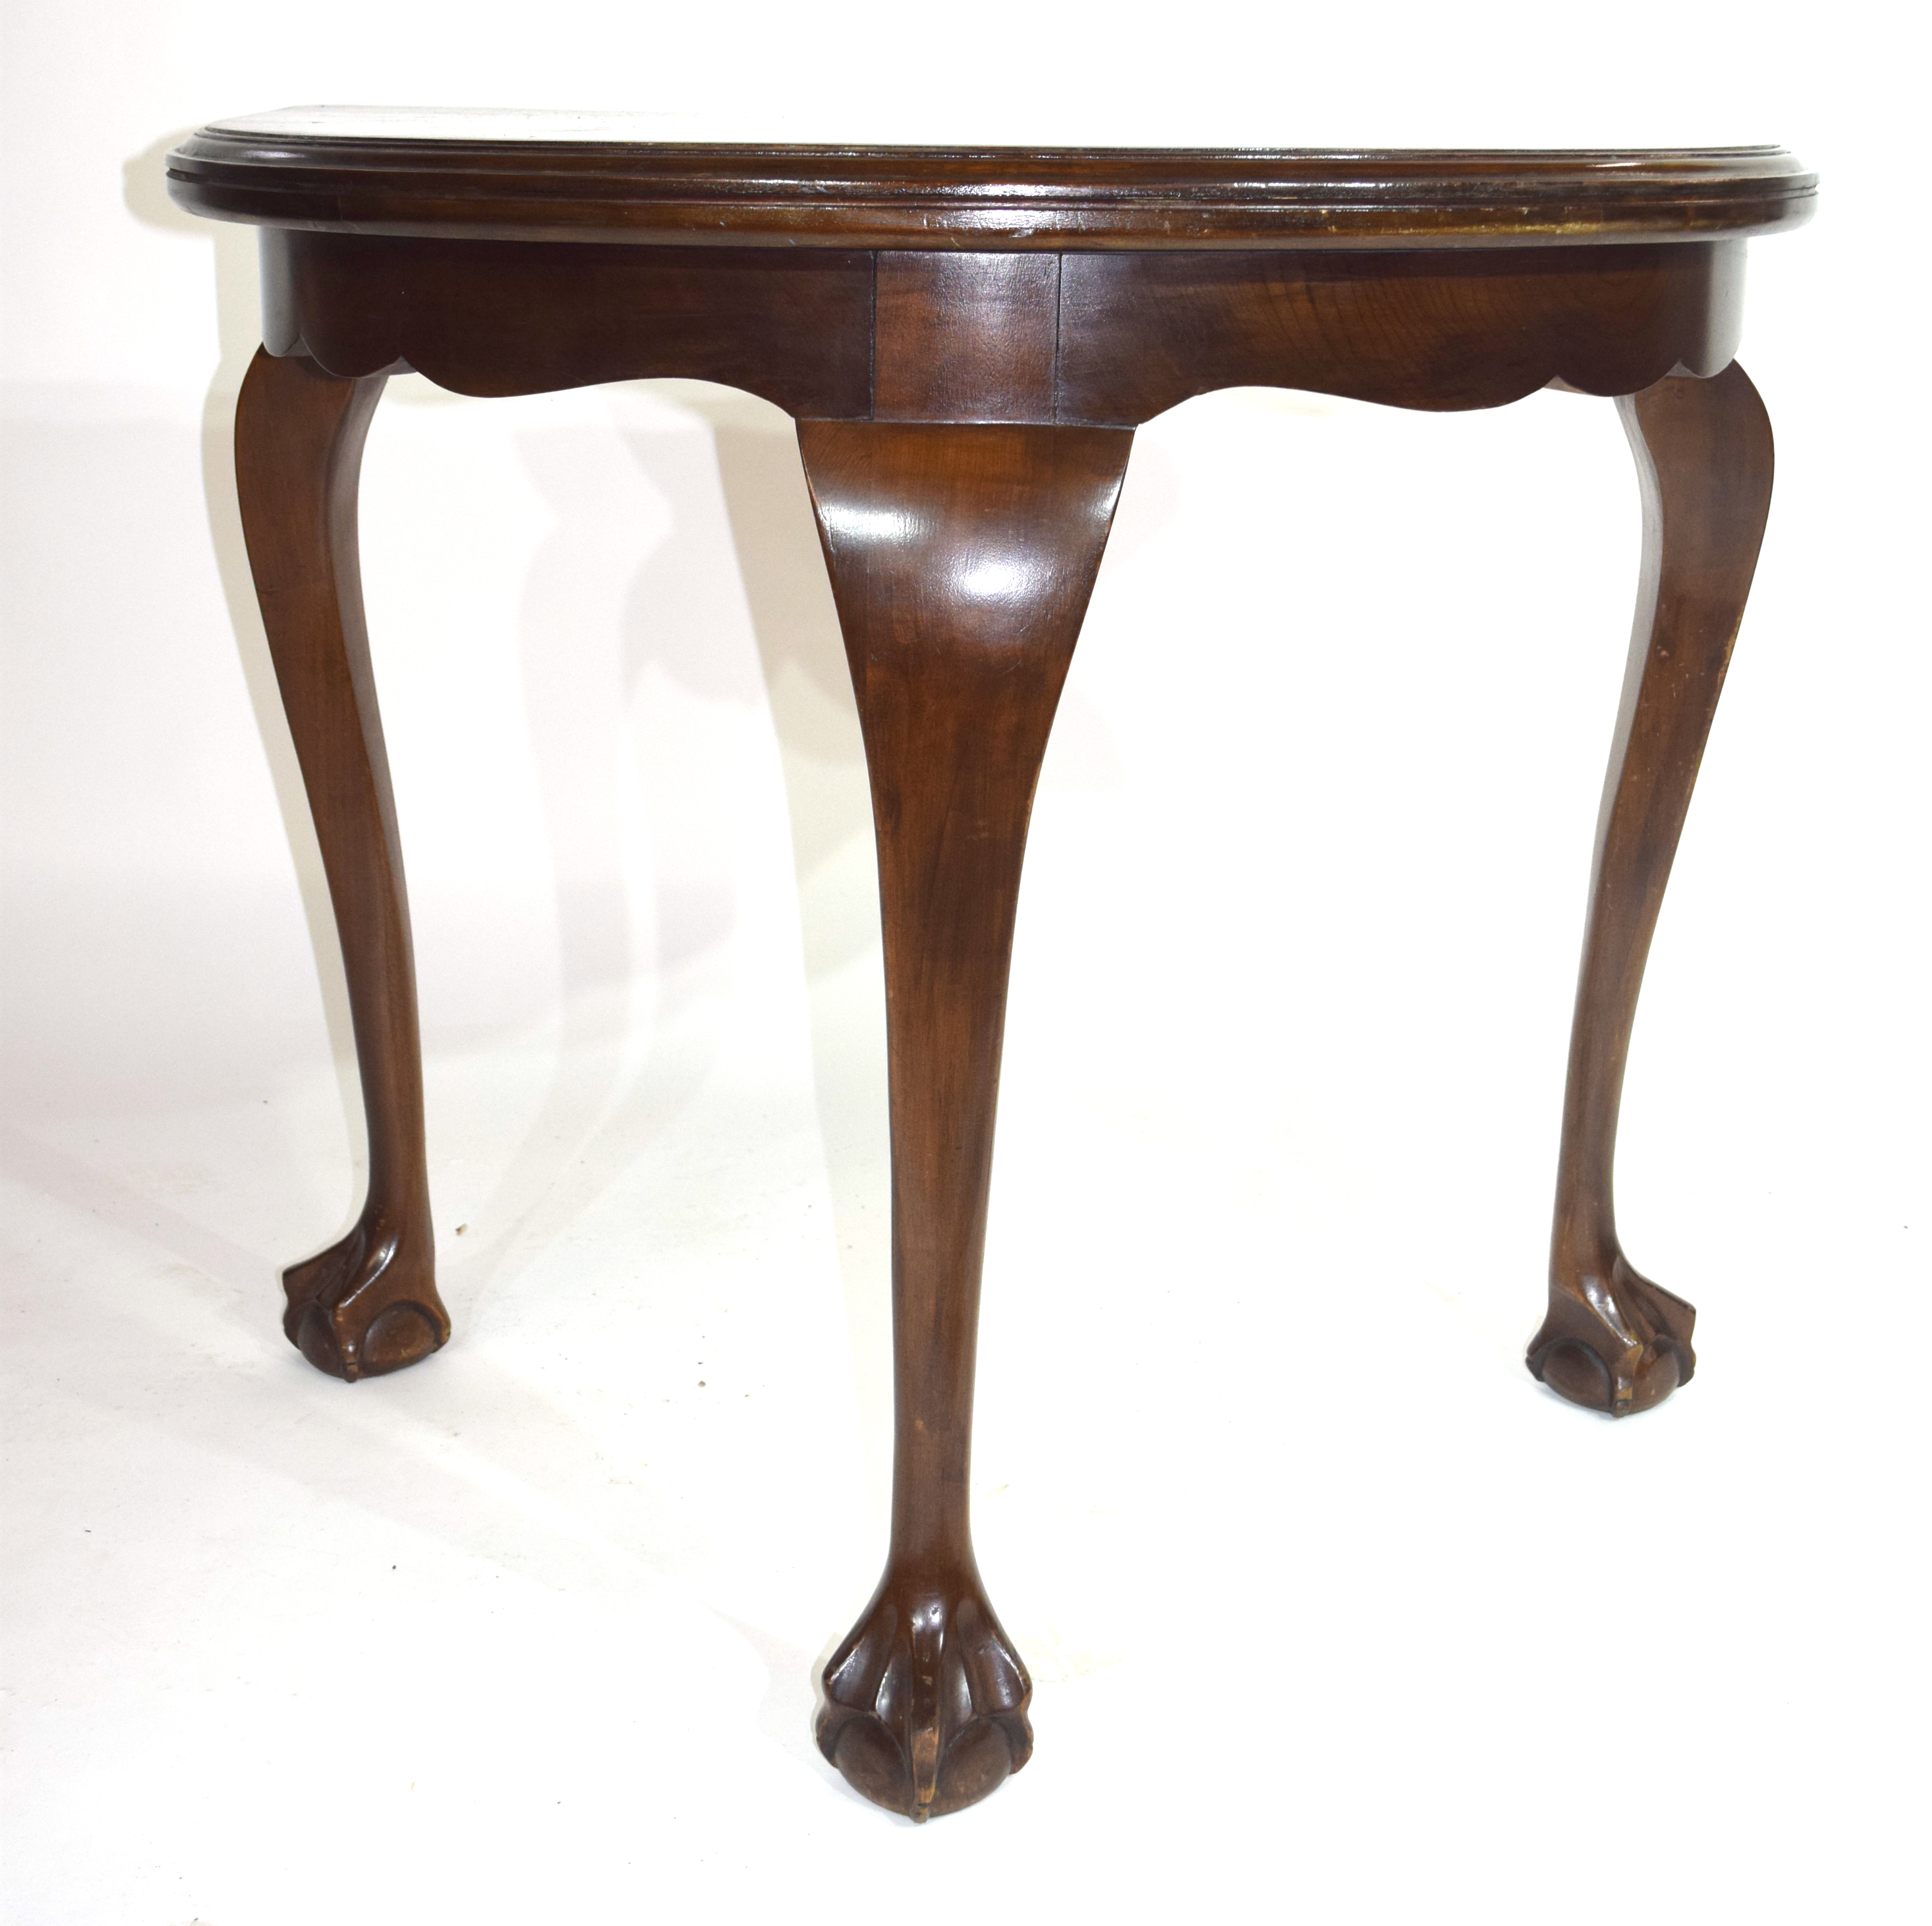 Edwardian mahogany demi-lune side table raised on three cabriole legs with ball and claw feet - Image 6 of 7